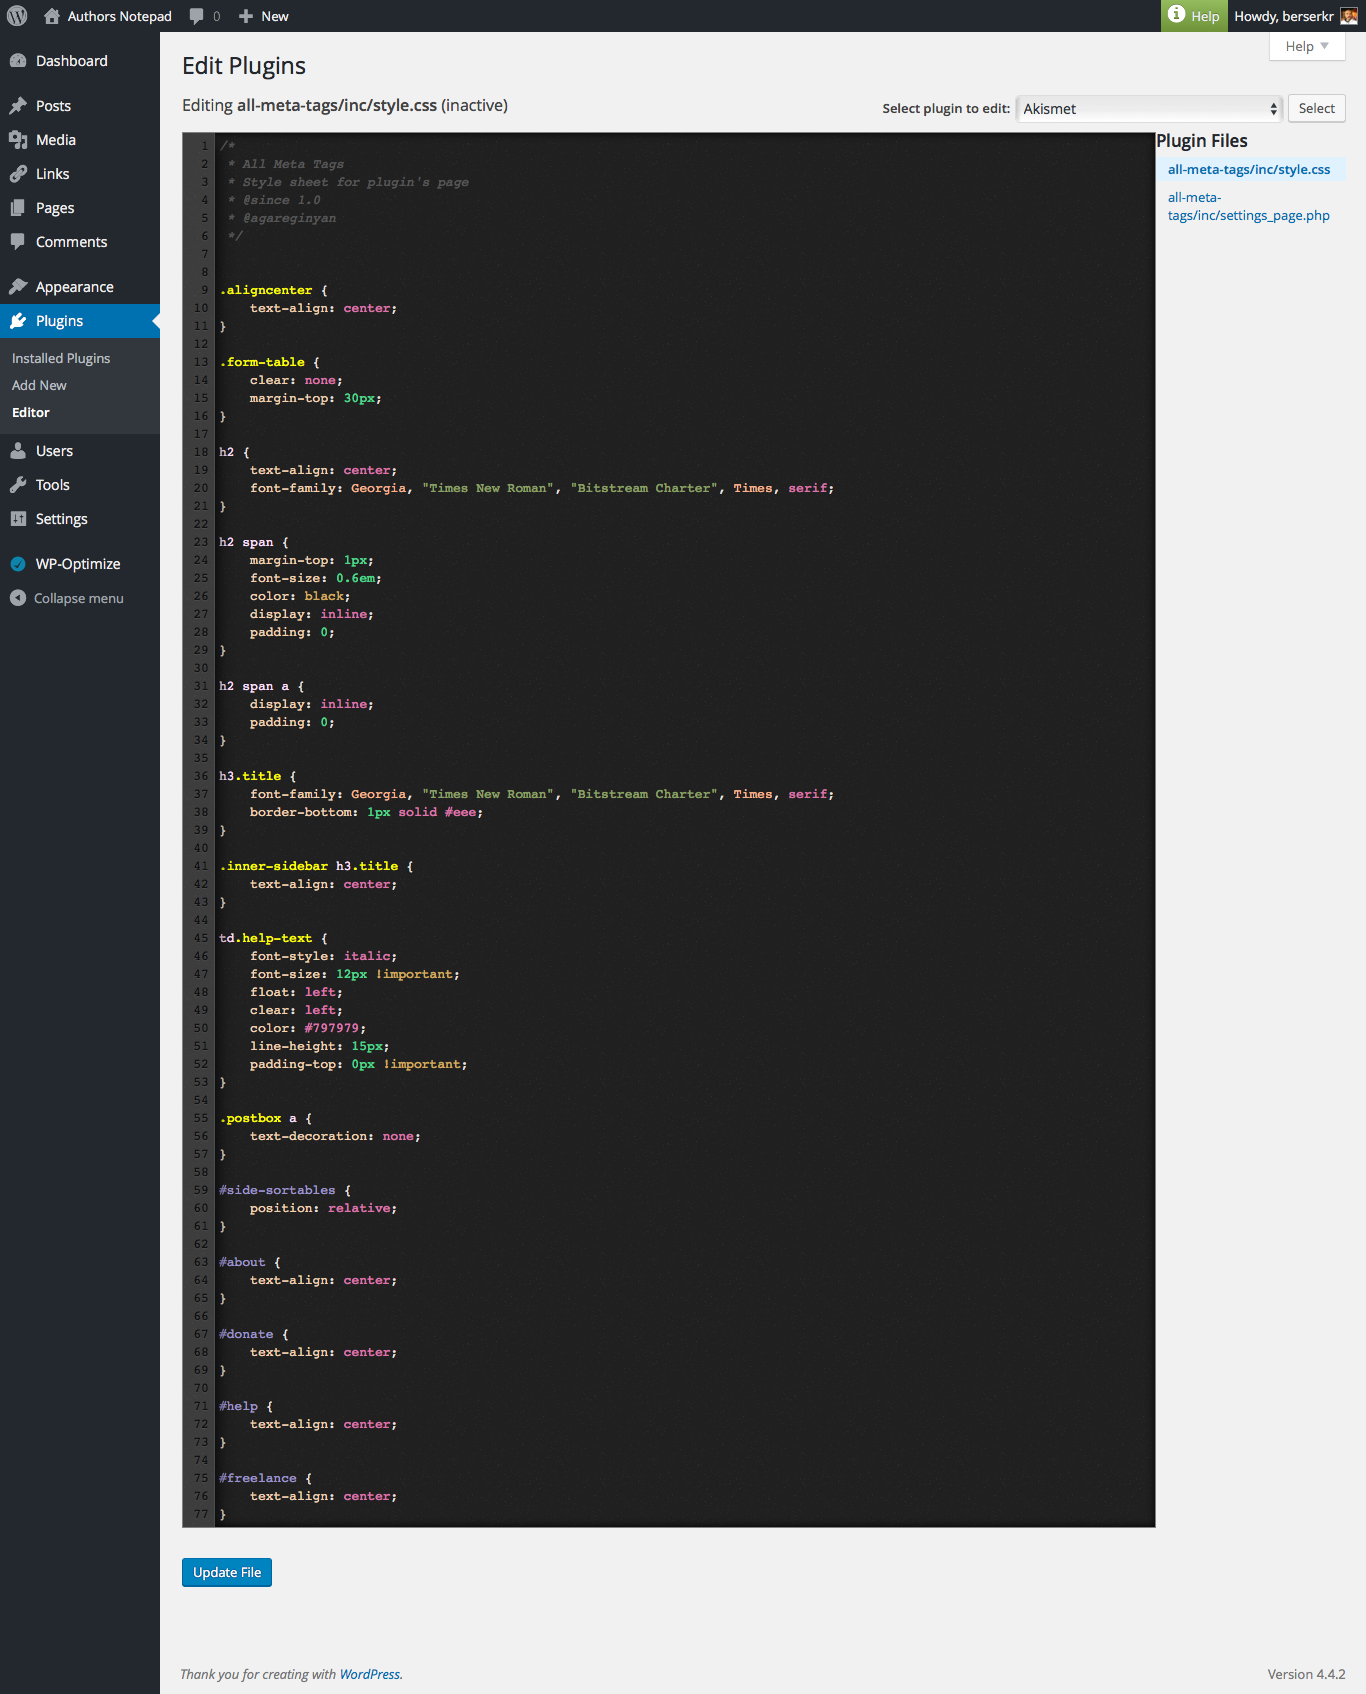 Theme Editor that provided by this plugin (color theme: ambiance).